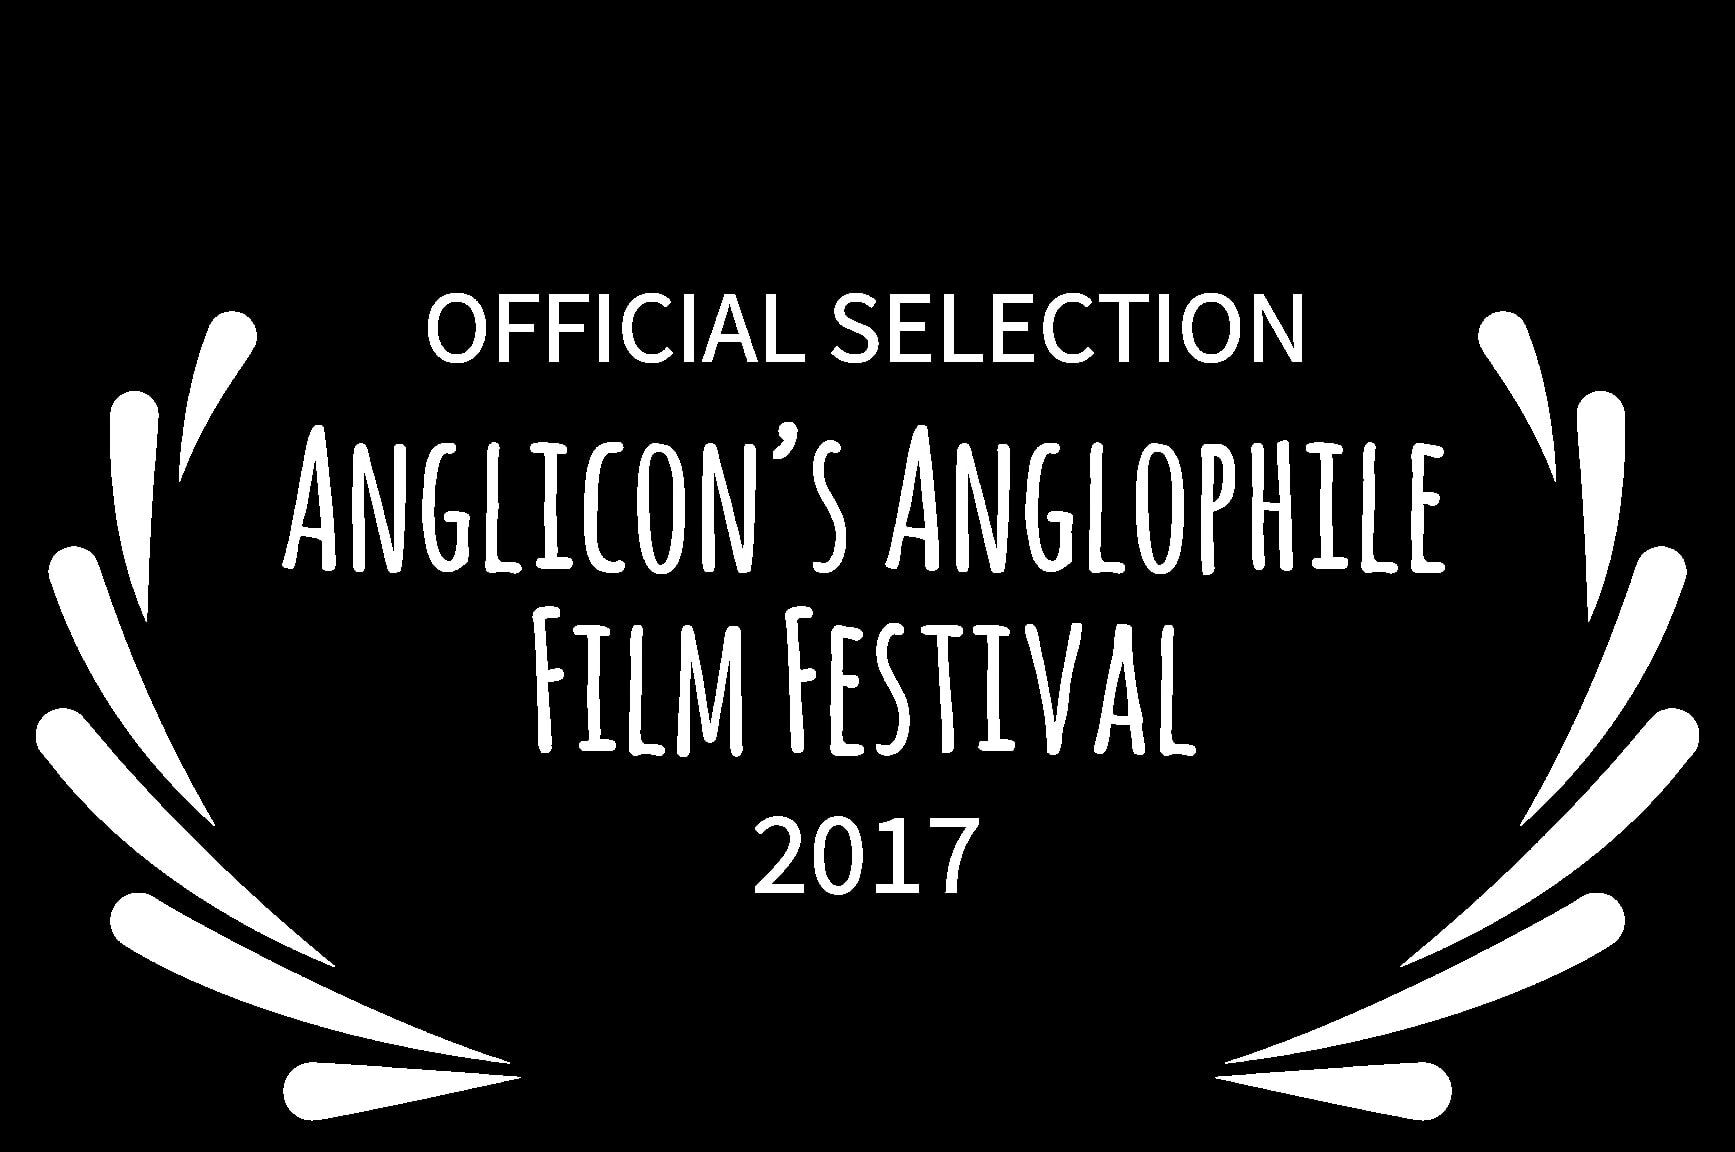 OFFICIAL SELECTION - Anglicons Anglophile Film Festival - 2017 - Inescapable